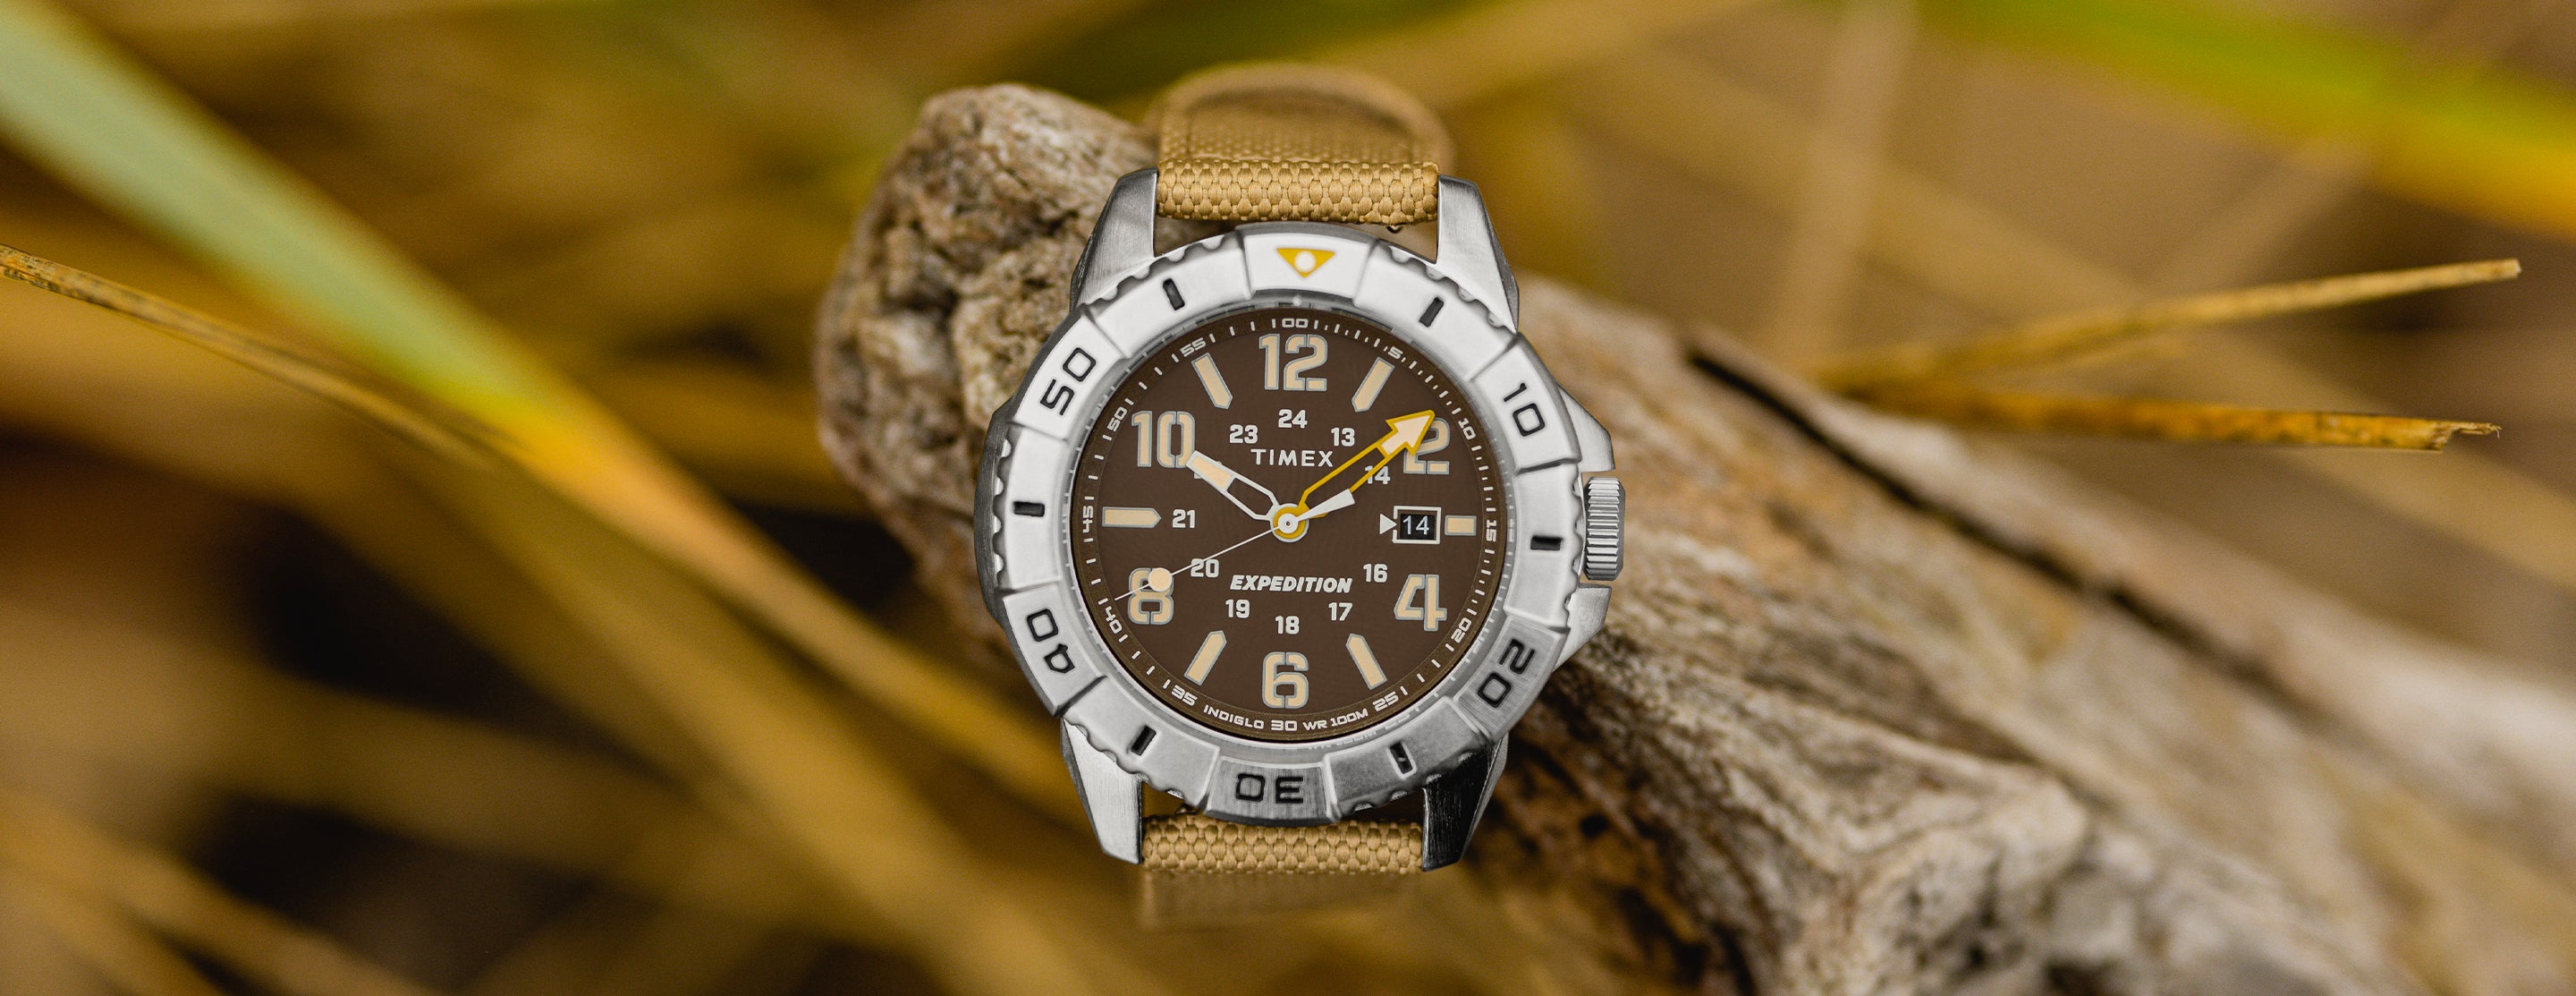 Expedition watches | Army watches, Watches for men, Timex watch men